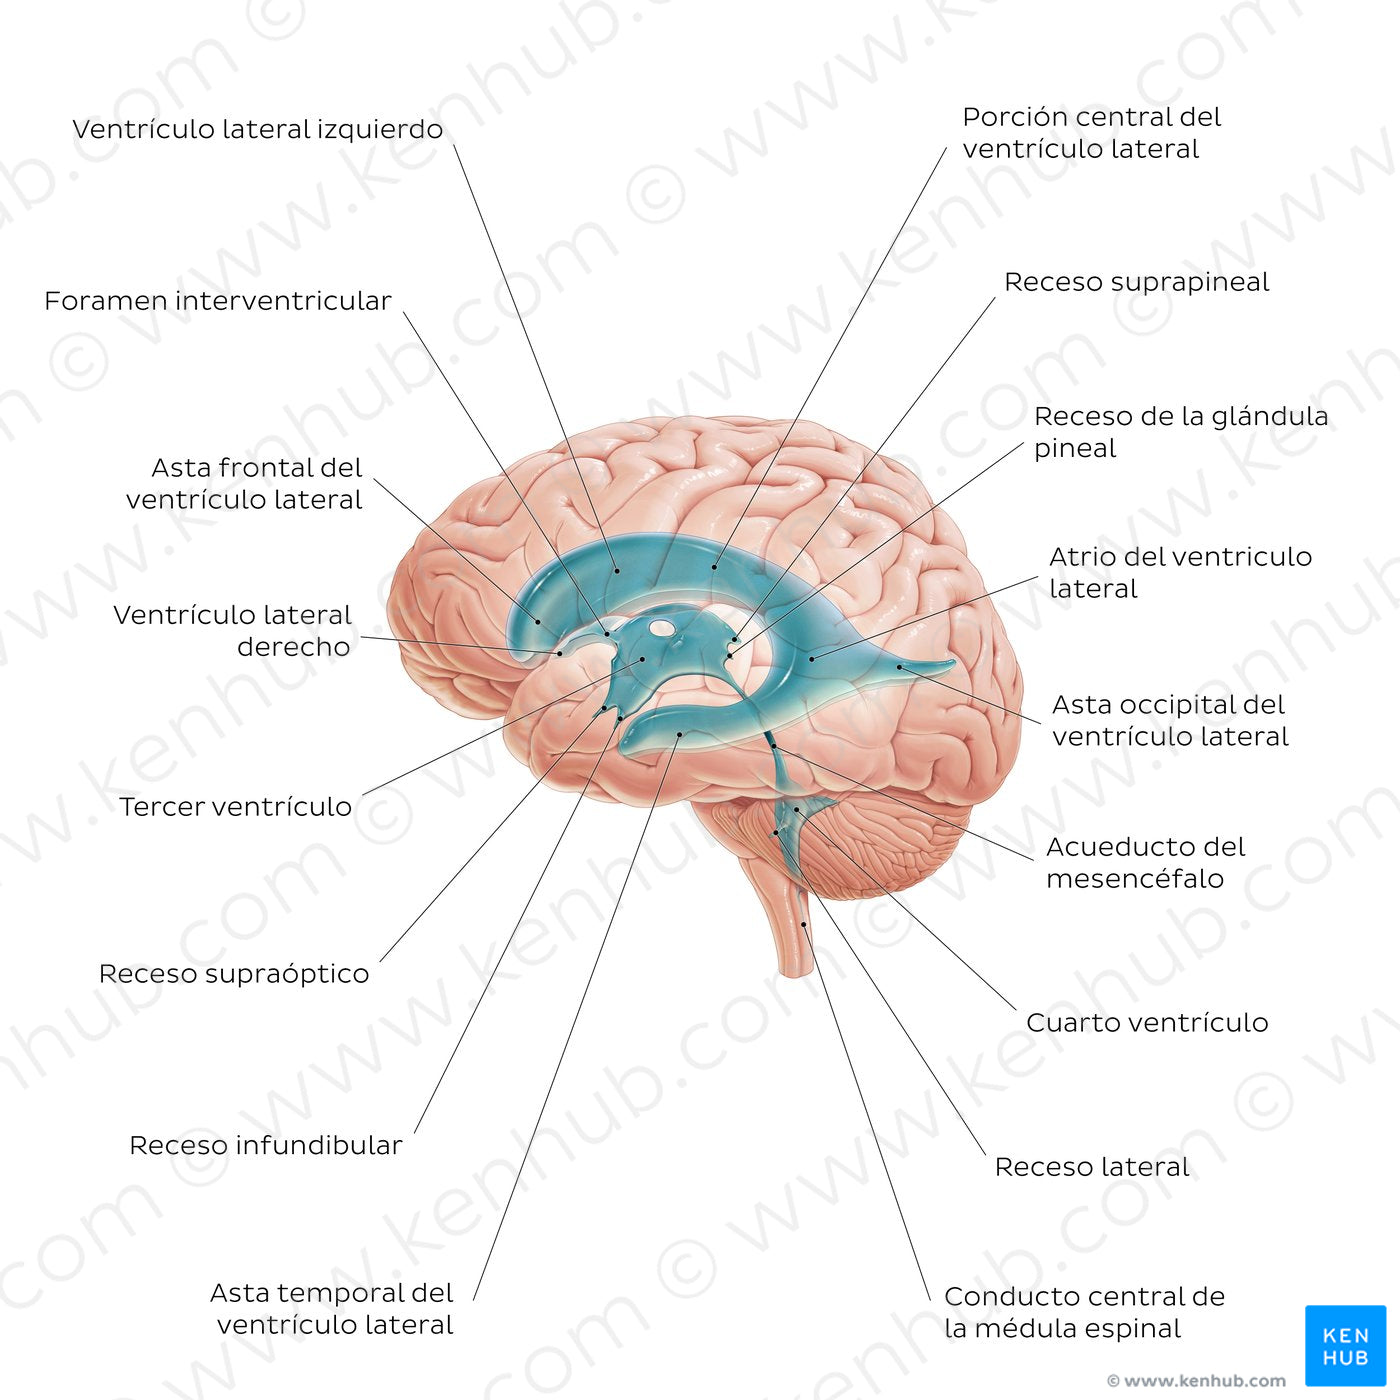 Ventricles of the brain (Spanish)